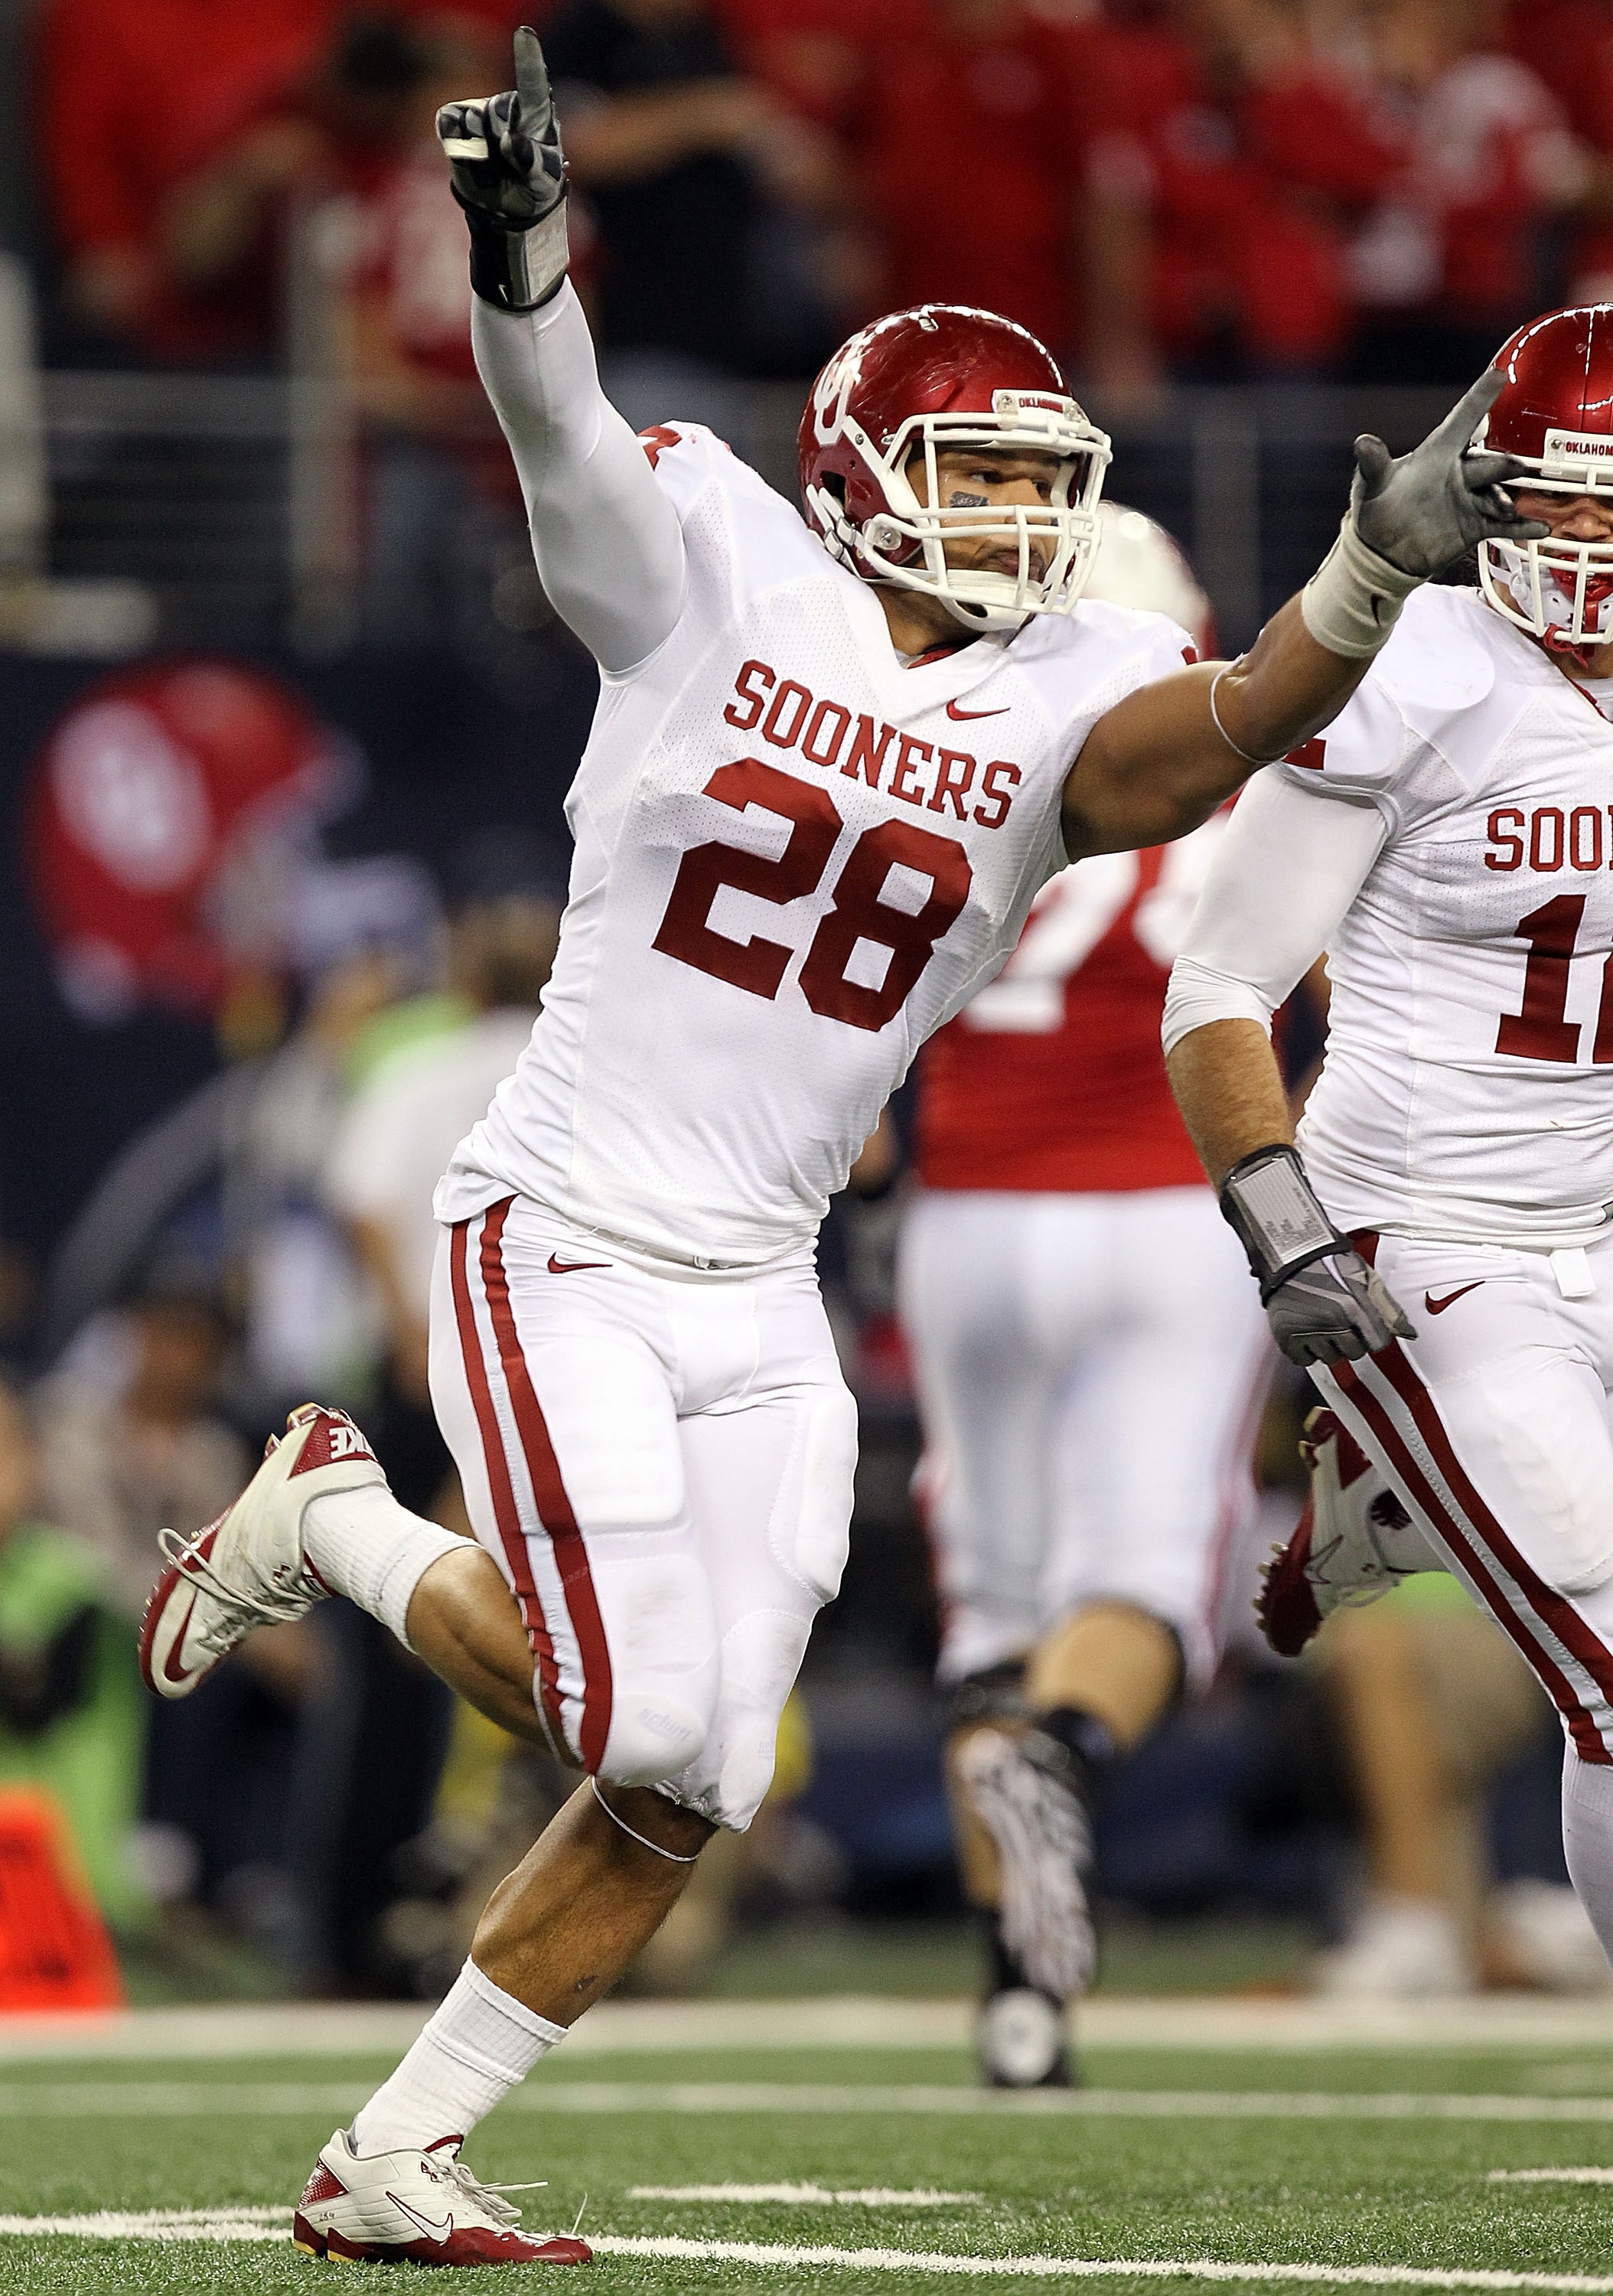 ARLINGTON, TX - DECEMBER 04:  Linebacker Travis Lewis #28 of the Oklahoma Sooners celebrate a pass interception against the Nebraska Cornhuskers during the Big 12 Championship at Cowboys Stadium on December 4, 2010 in Arlington, Texas.  (Photo by Ronald M